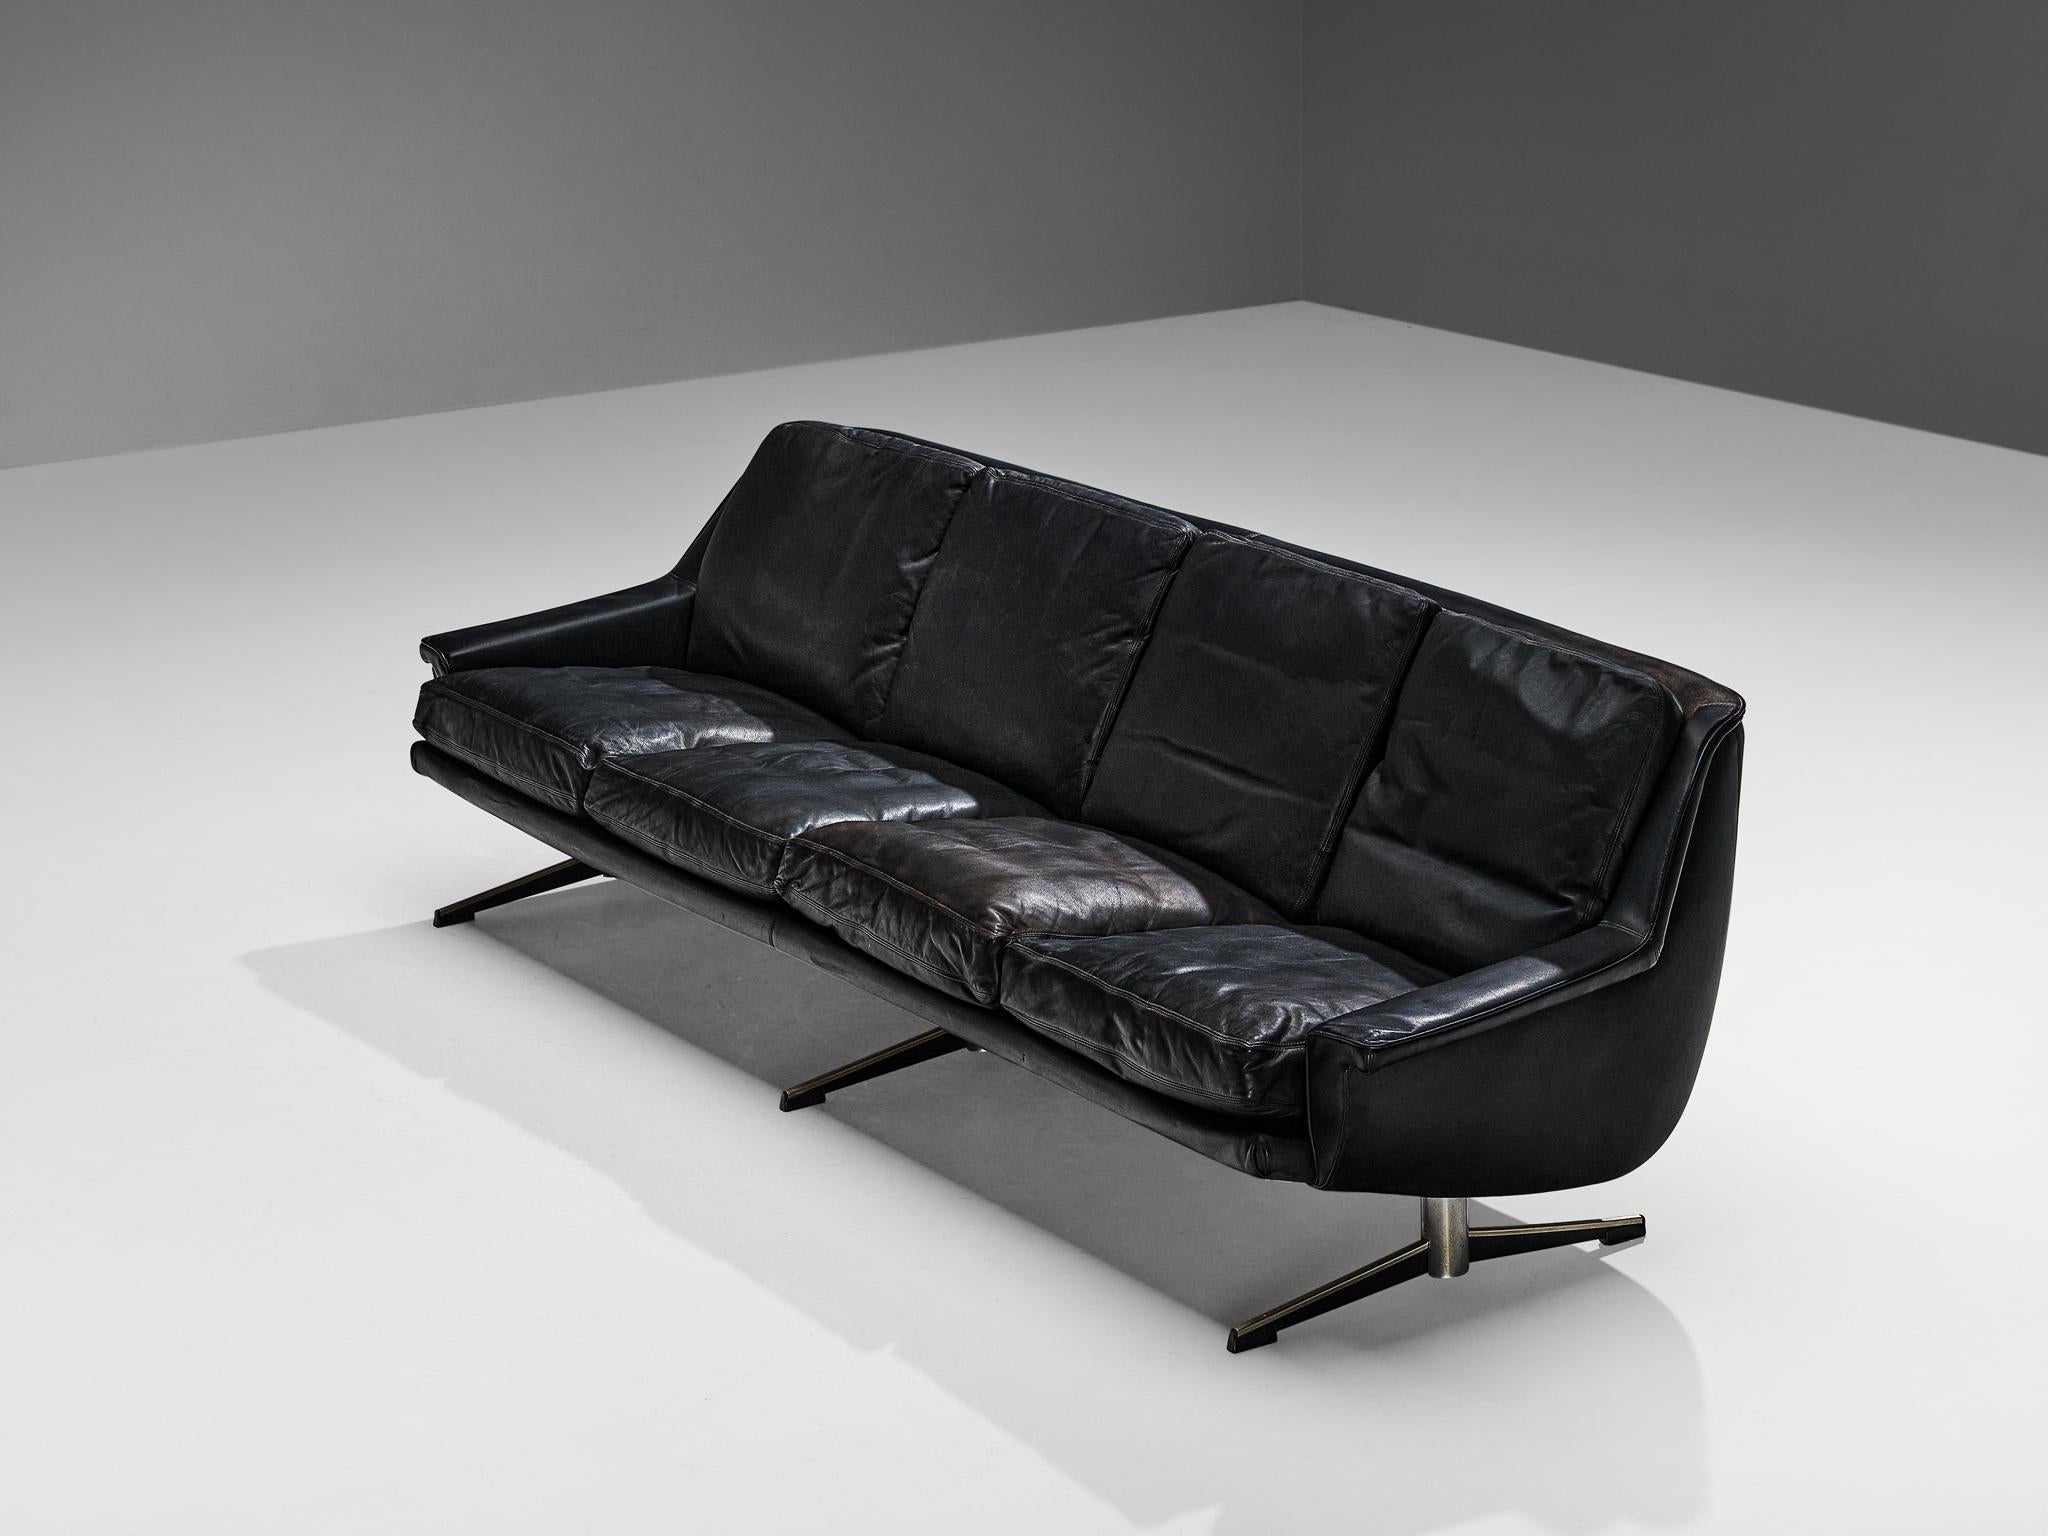 Werner Langenfeld for ESA, sofa, leather, chrome-plated steel, aluminum, Denmark, 1960s

This modern sofa features a splendid construction designed with a minimalist approach. When seen from the side, the backrest develops in a curvaceous movement